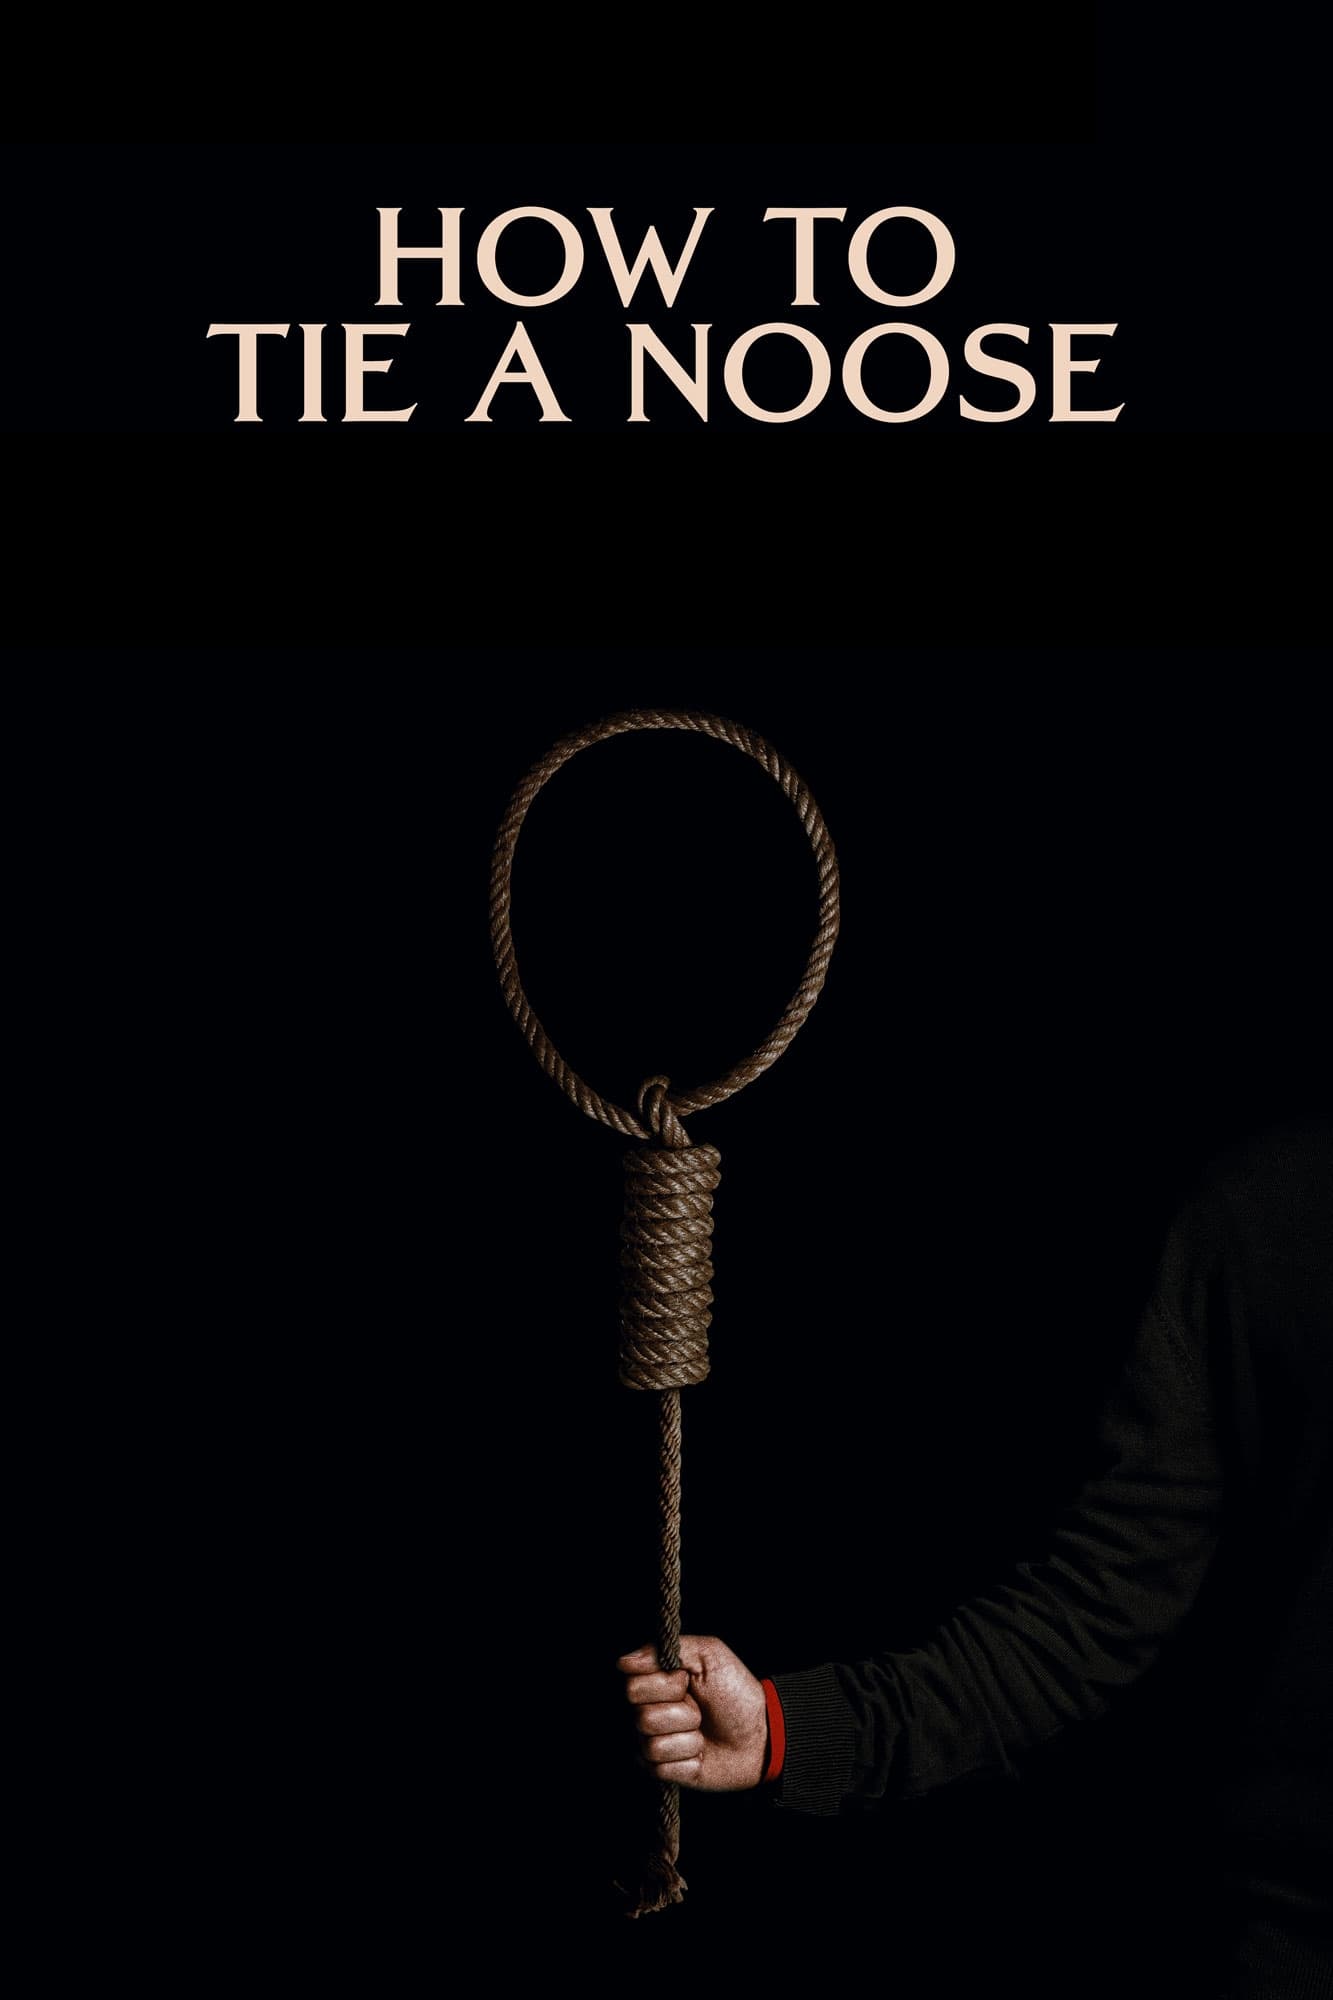 How to Tie a Noose